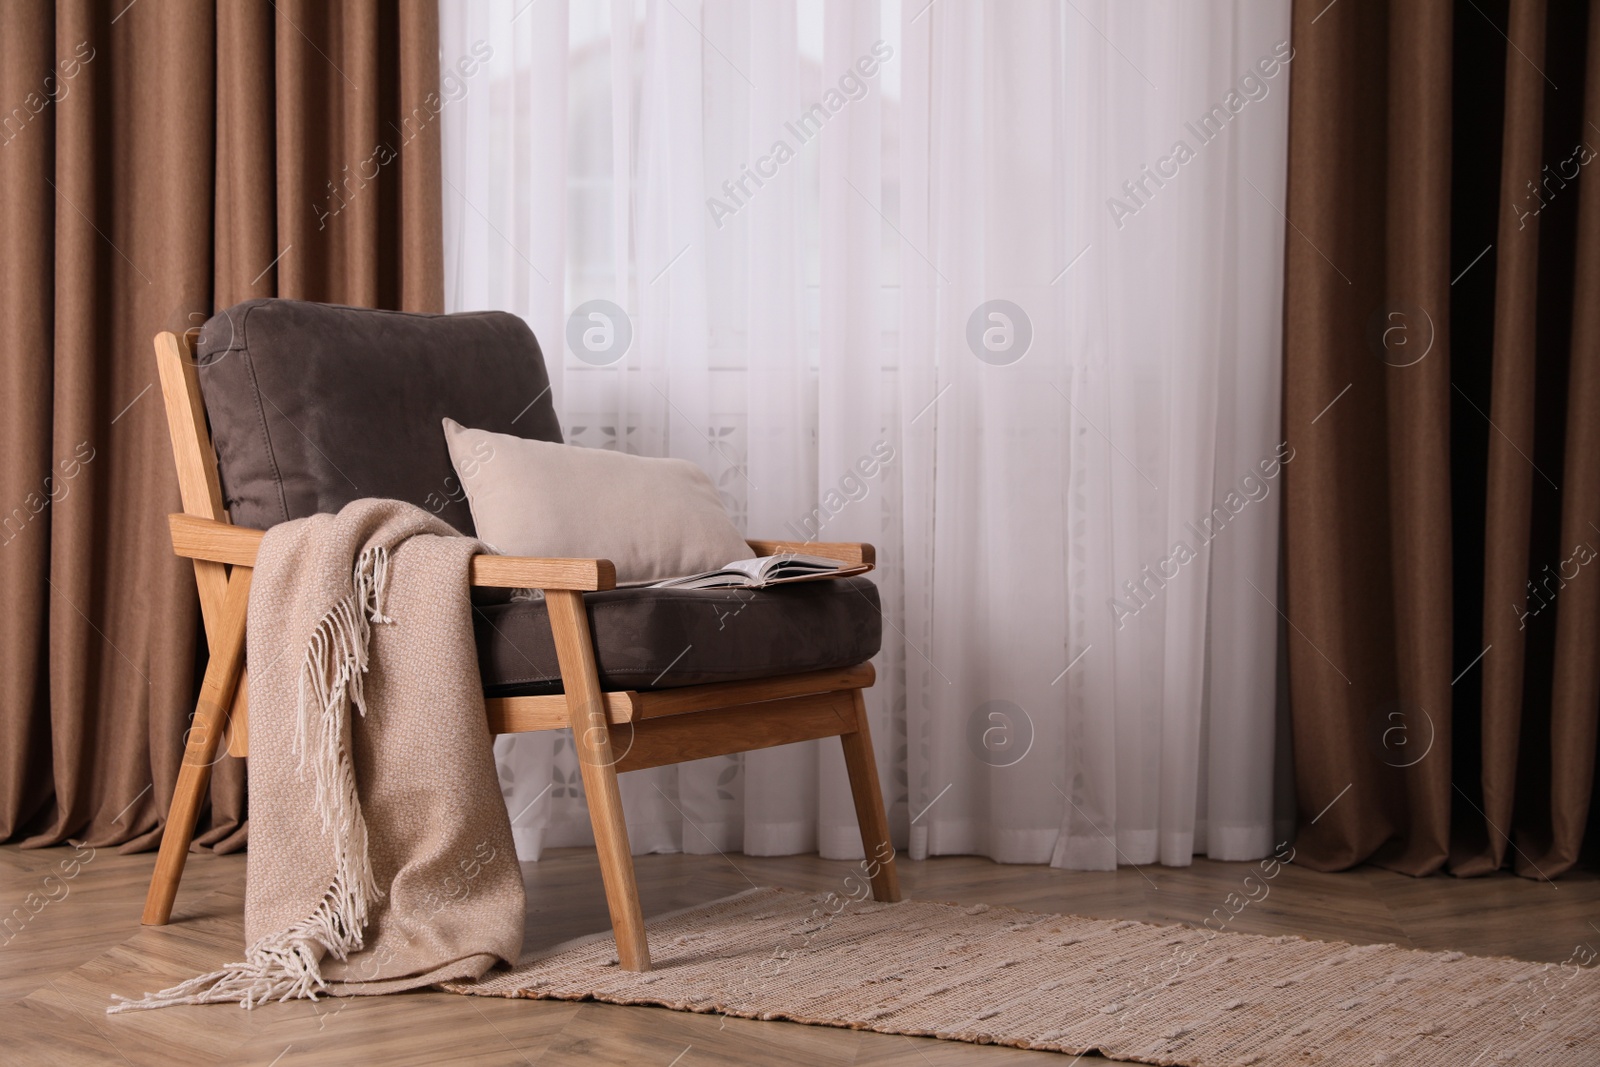 Photo of Comfortable armchair with blanket near window indoors, space for text. Interior design